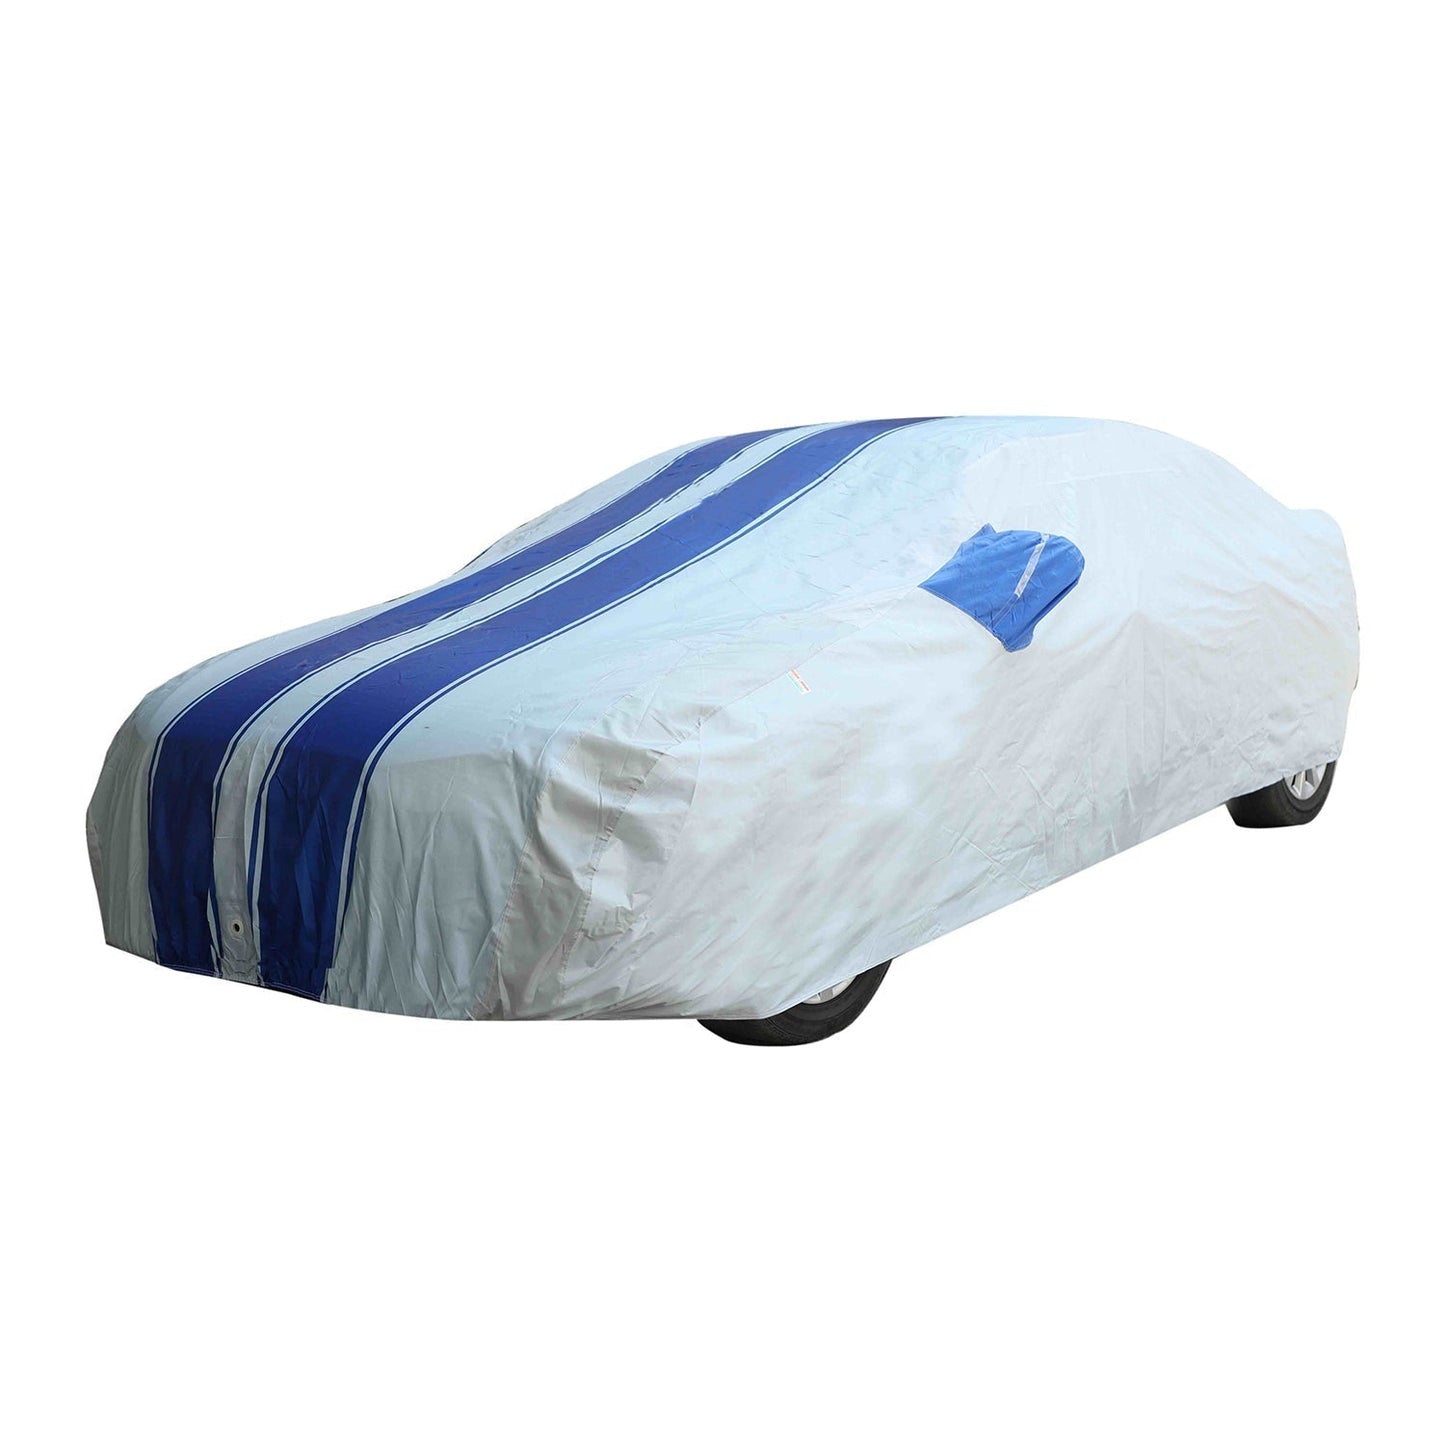 Oshotto 100% Blue dustproof and Water Resistant Car Body Cover with Mirror Pockets For Tata Harrier